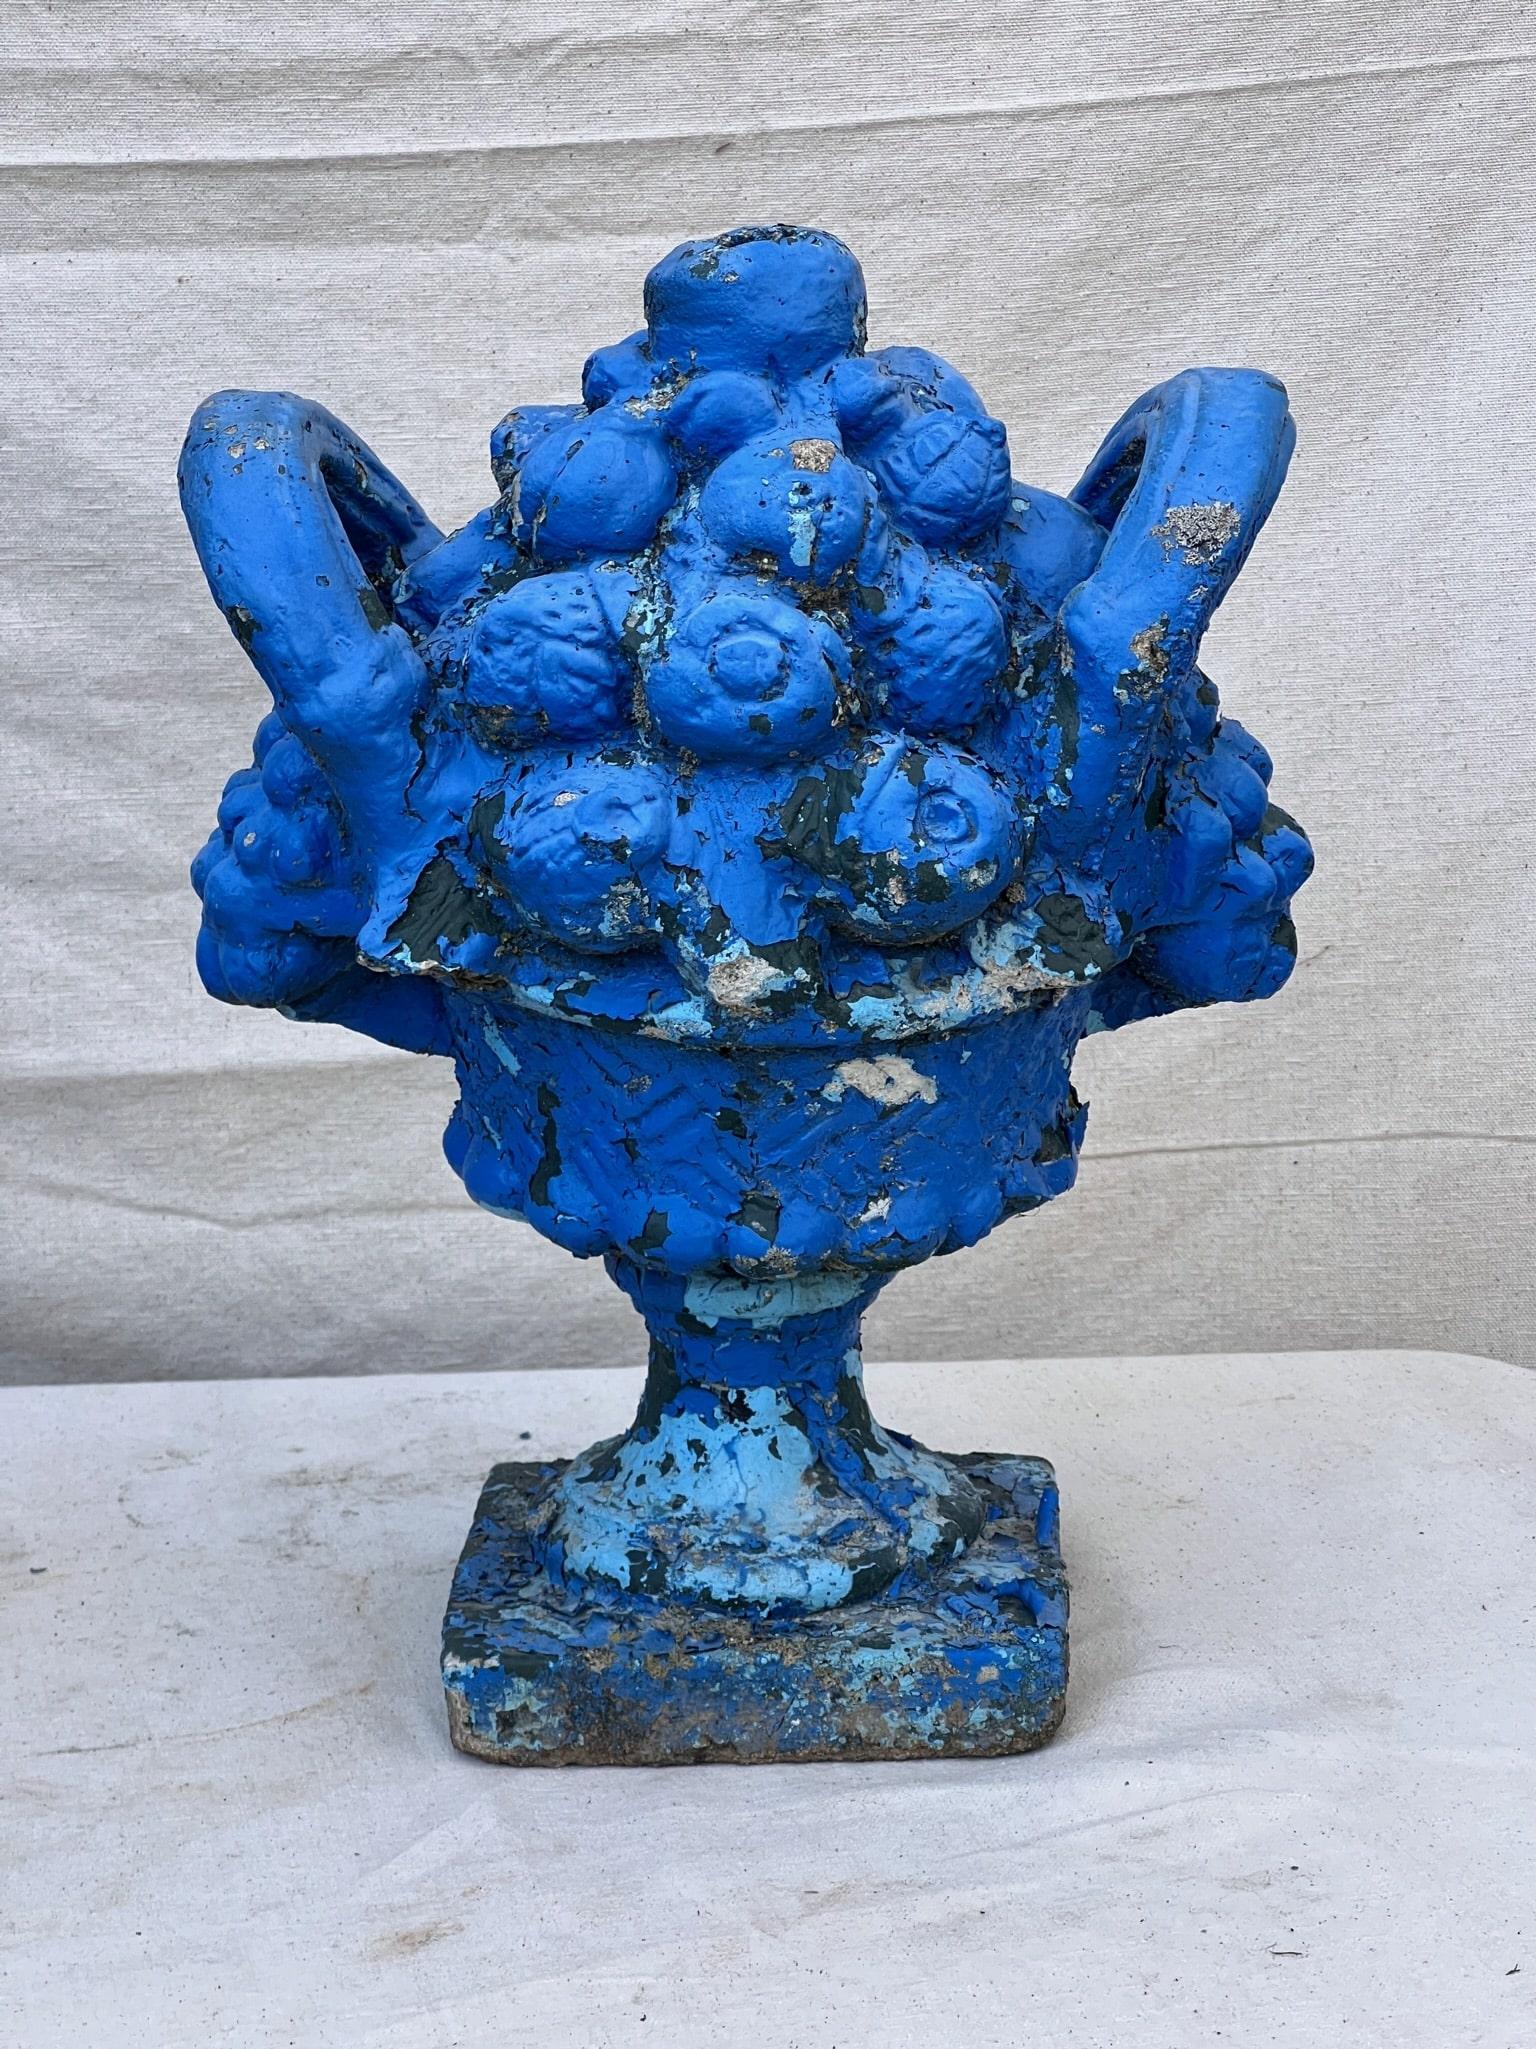 This meticulously crafted garden ornament showcases a captivating blue hue that carries an air of sophistication, while the skillful paint chipping across its body lends a naturally weathered allure, evoking the passage of time and the beauty of